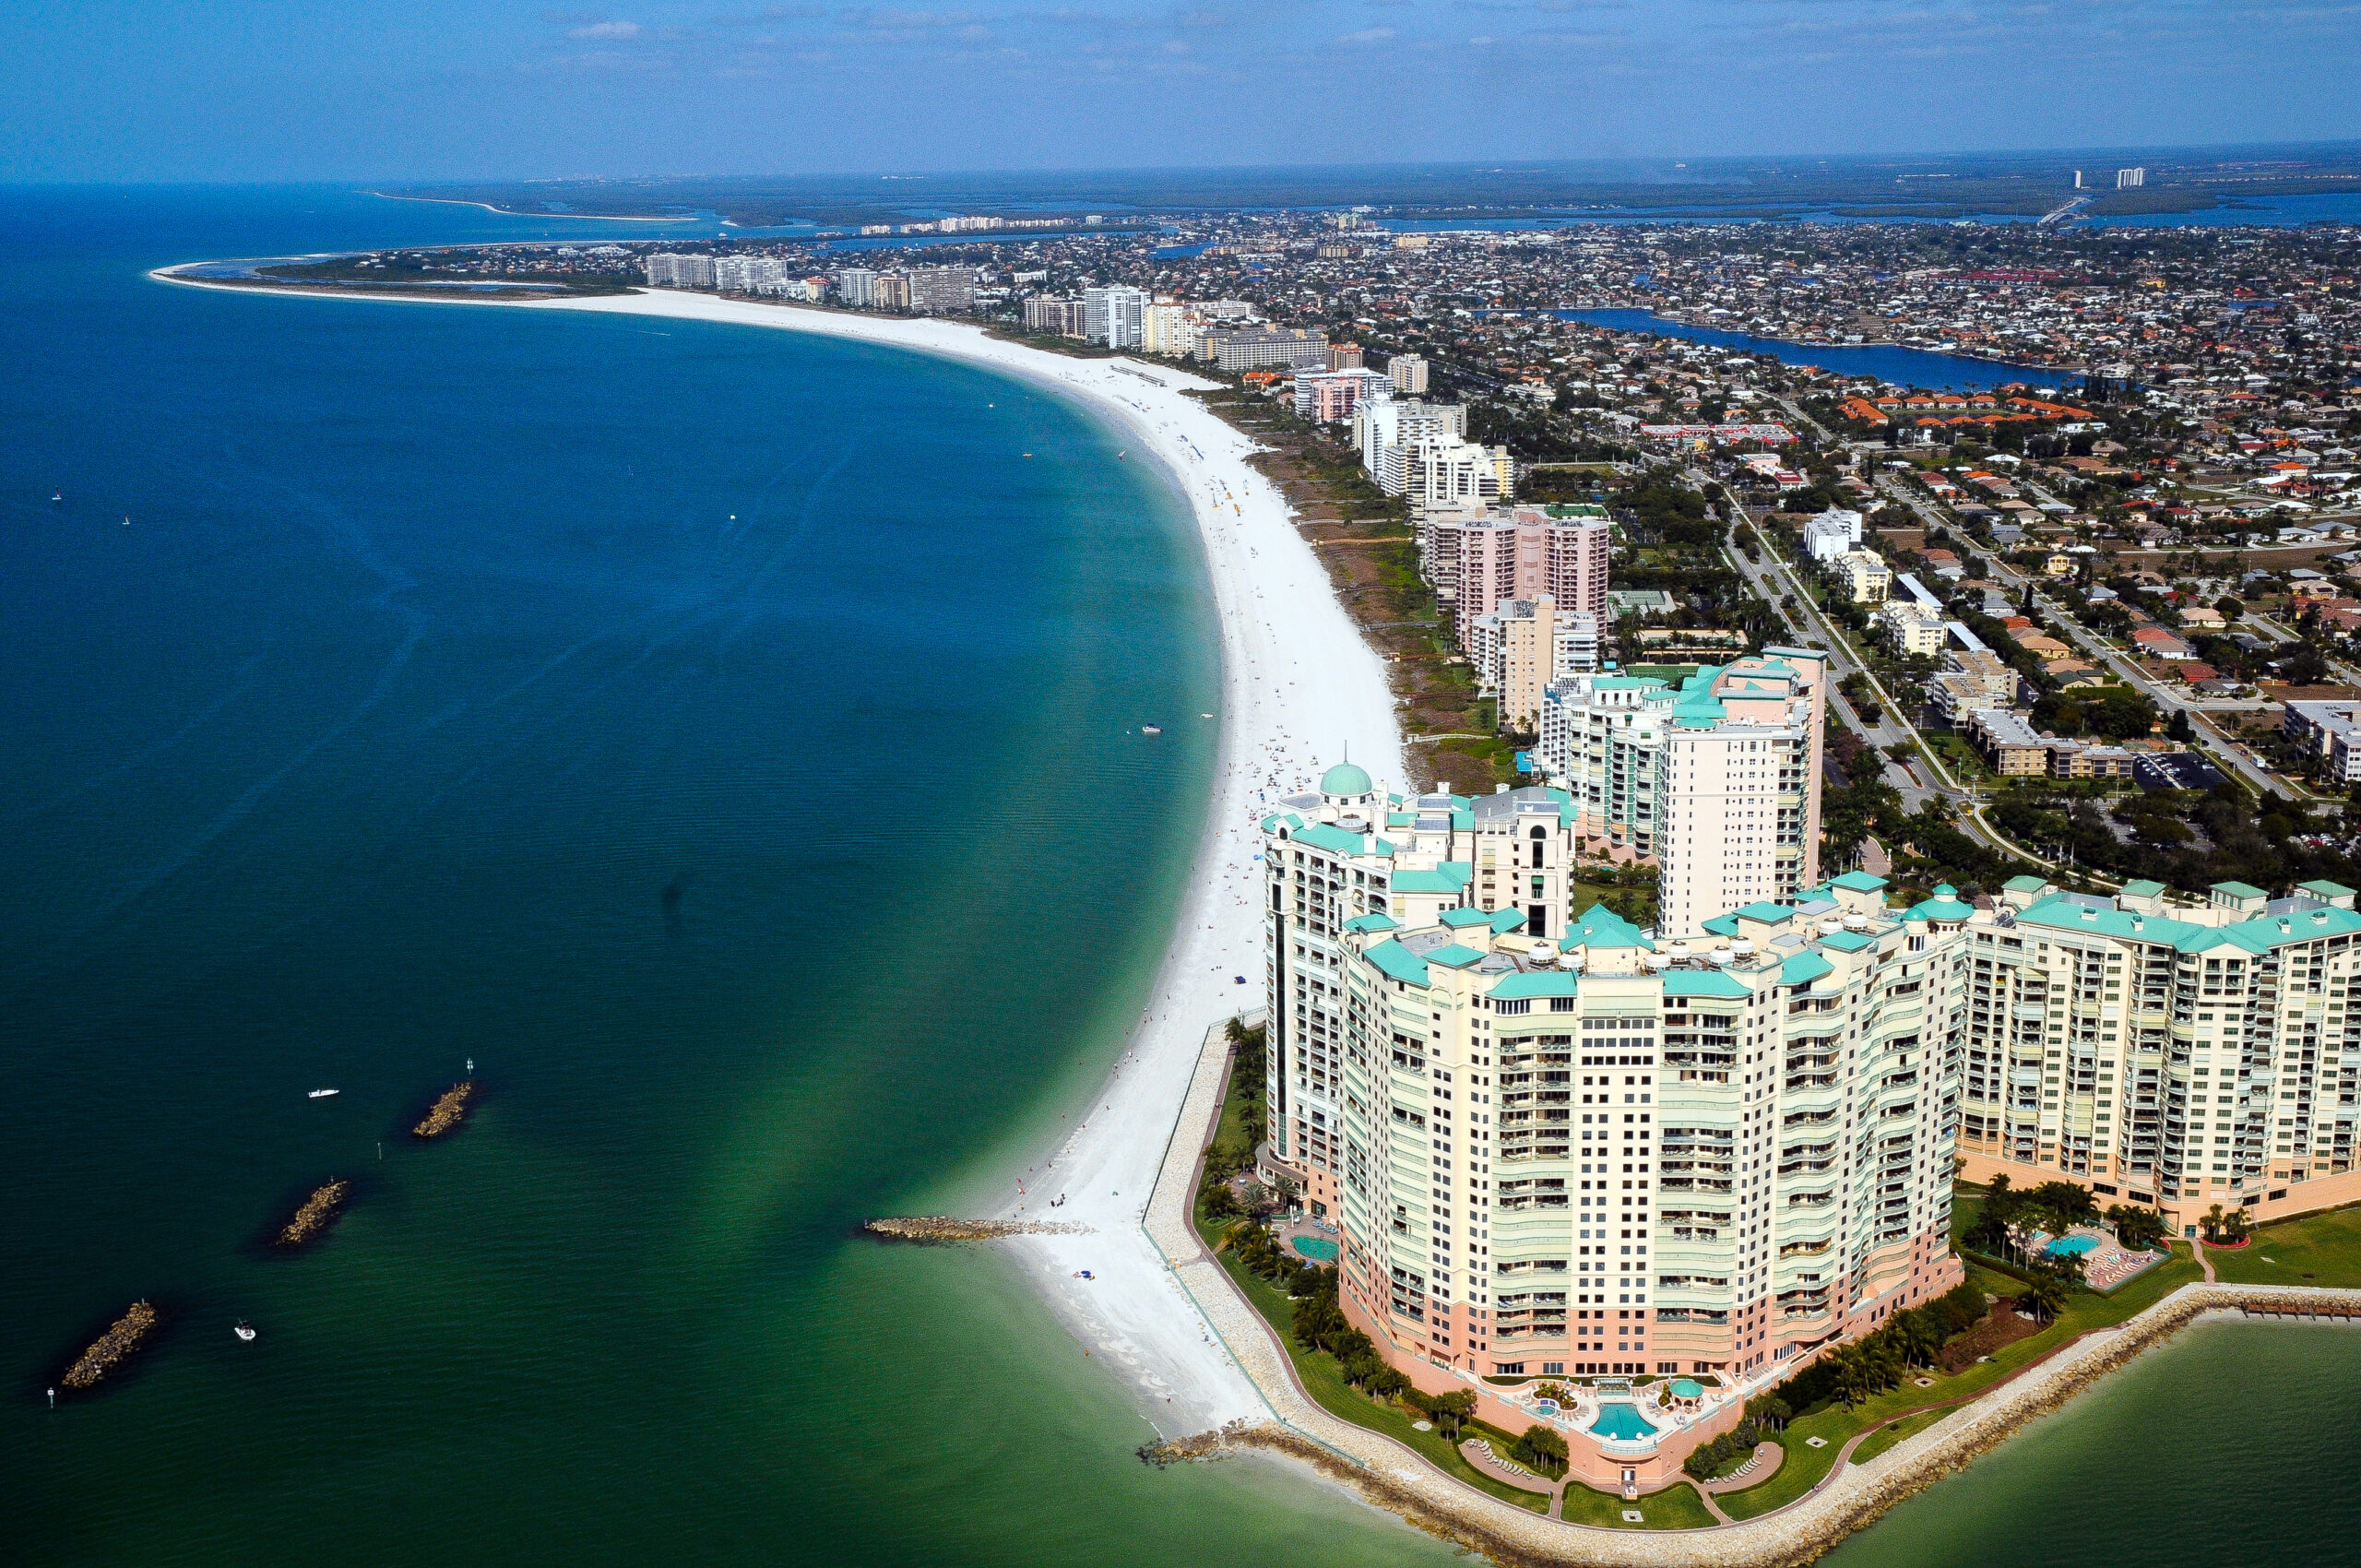 MARCO ISLAND LODGES STRONG FIRST QUARTER OF 2018 AND GARNERS BEST DESTINATION ACCOLADES